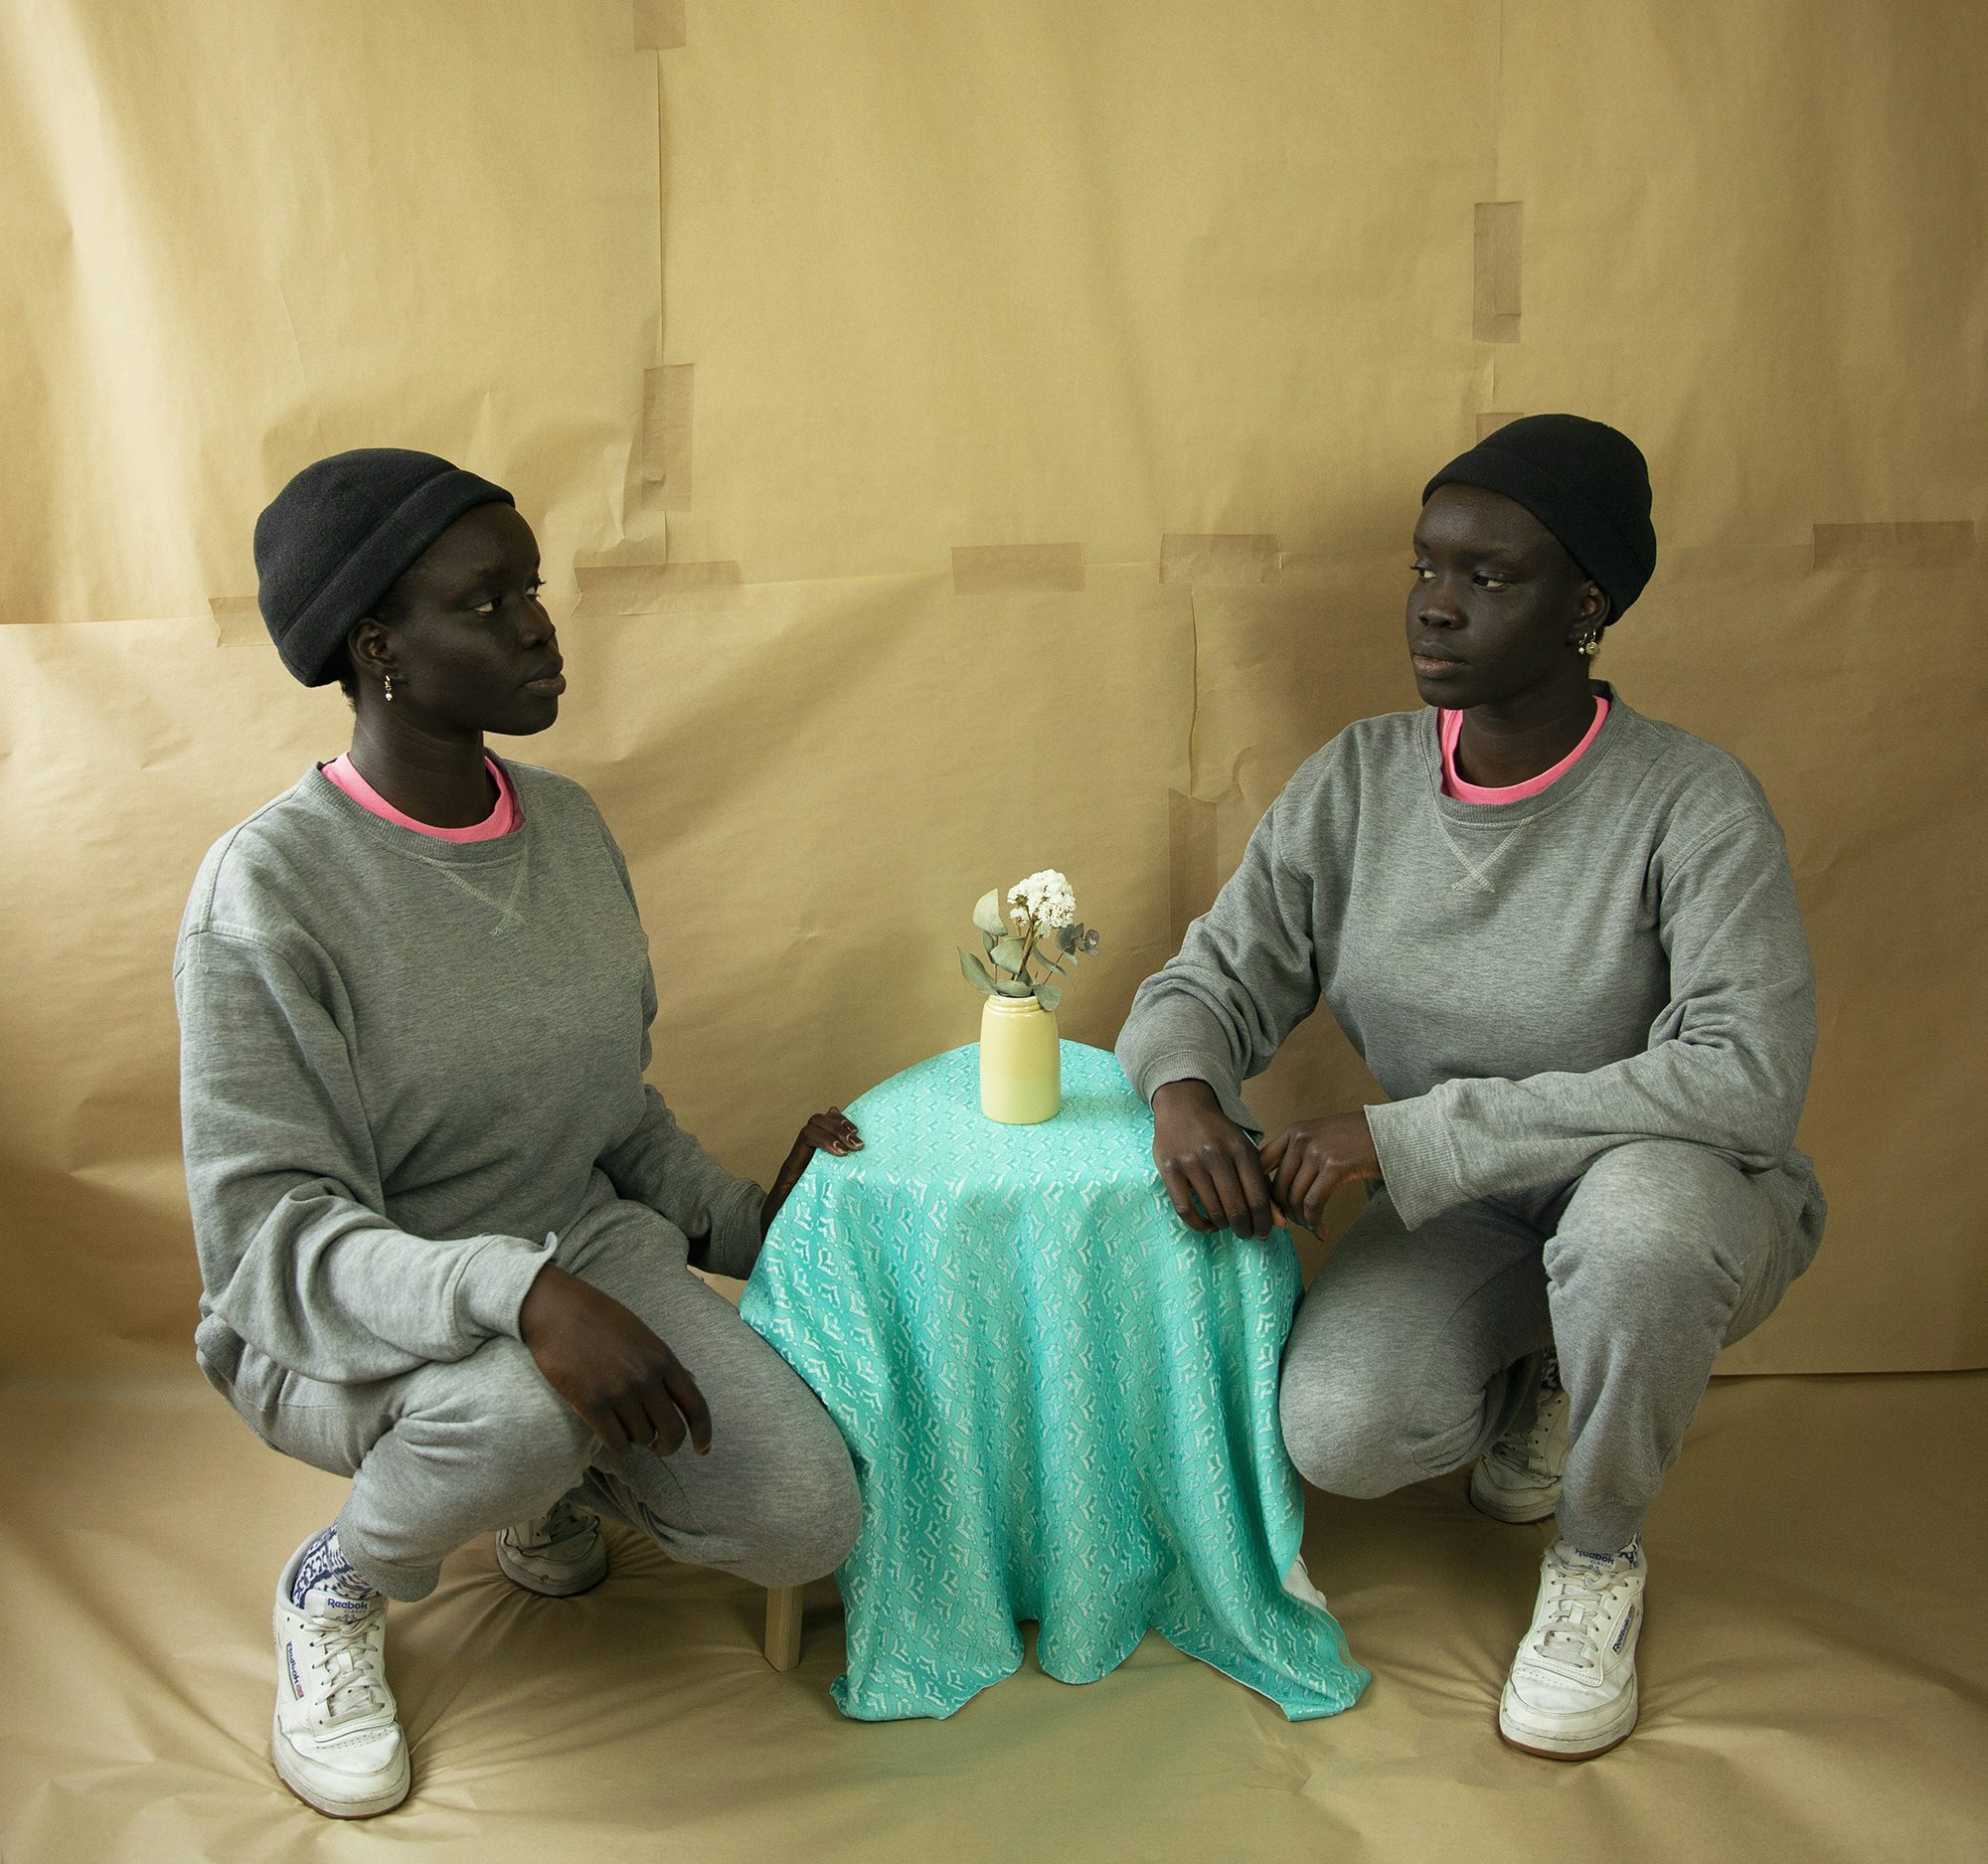 Atom Ateng, Tracksuit Twins (Uncles in America) - Surat Series, Inkjet on Paper, 2022